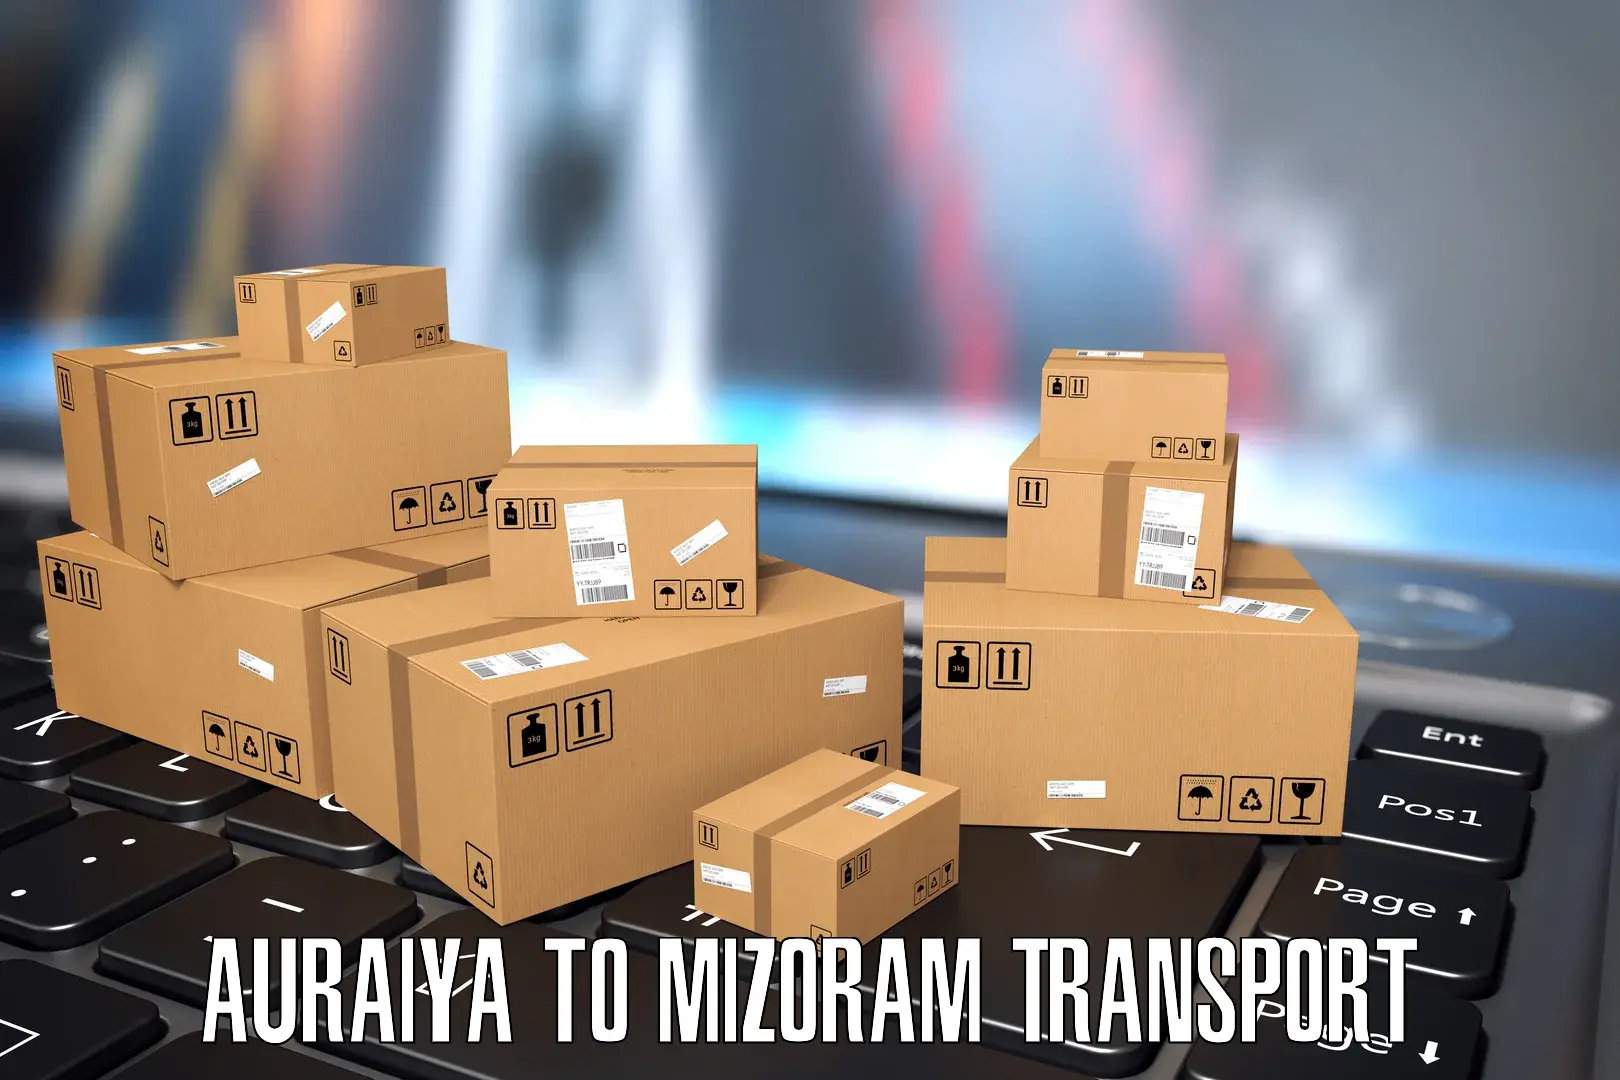 Container transport service Auraiya to Siaha